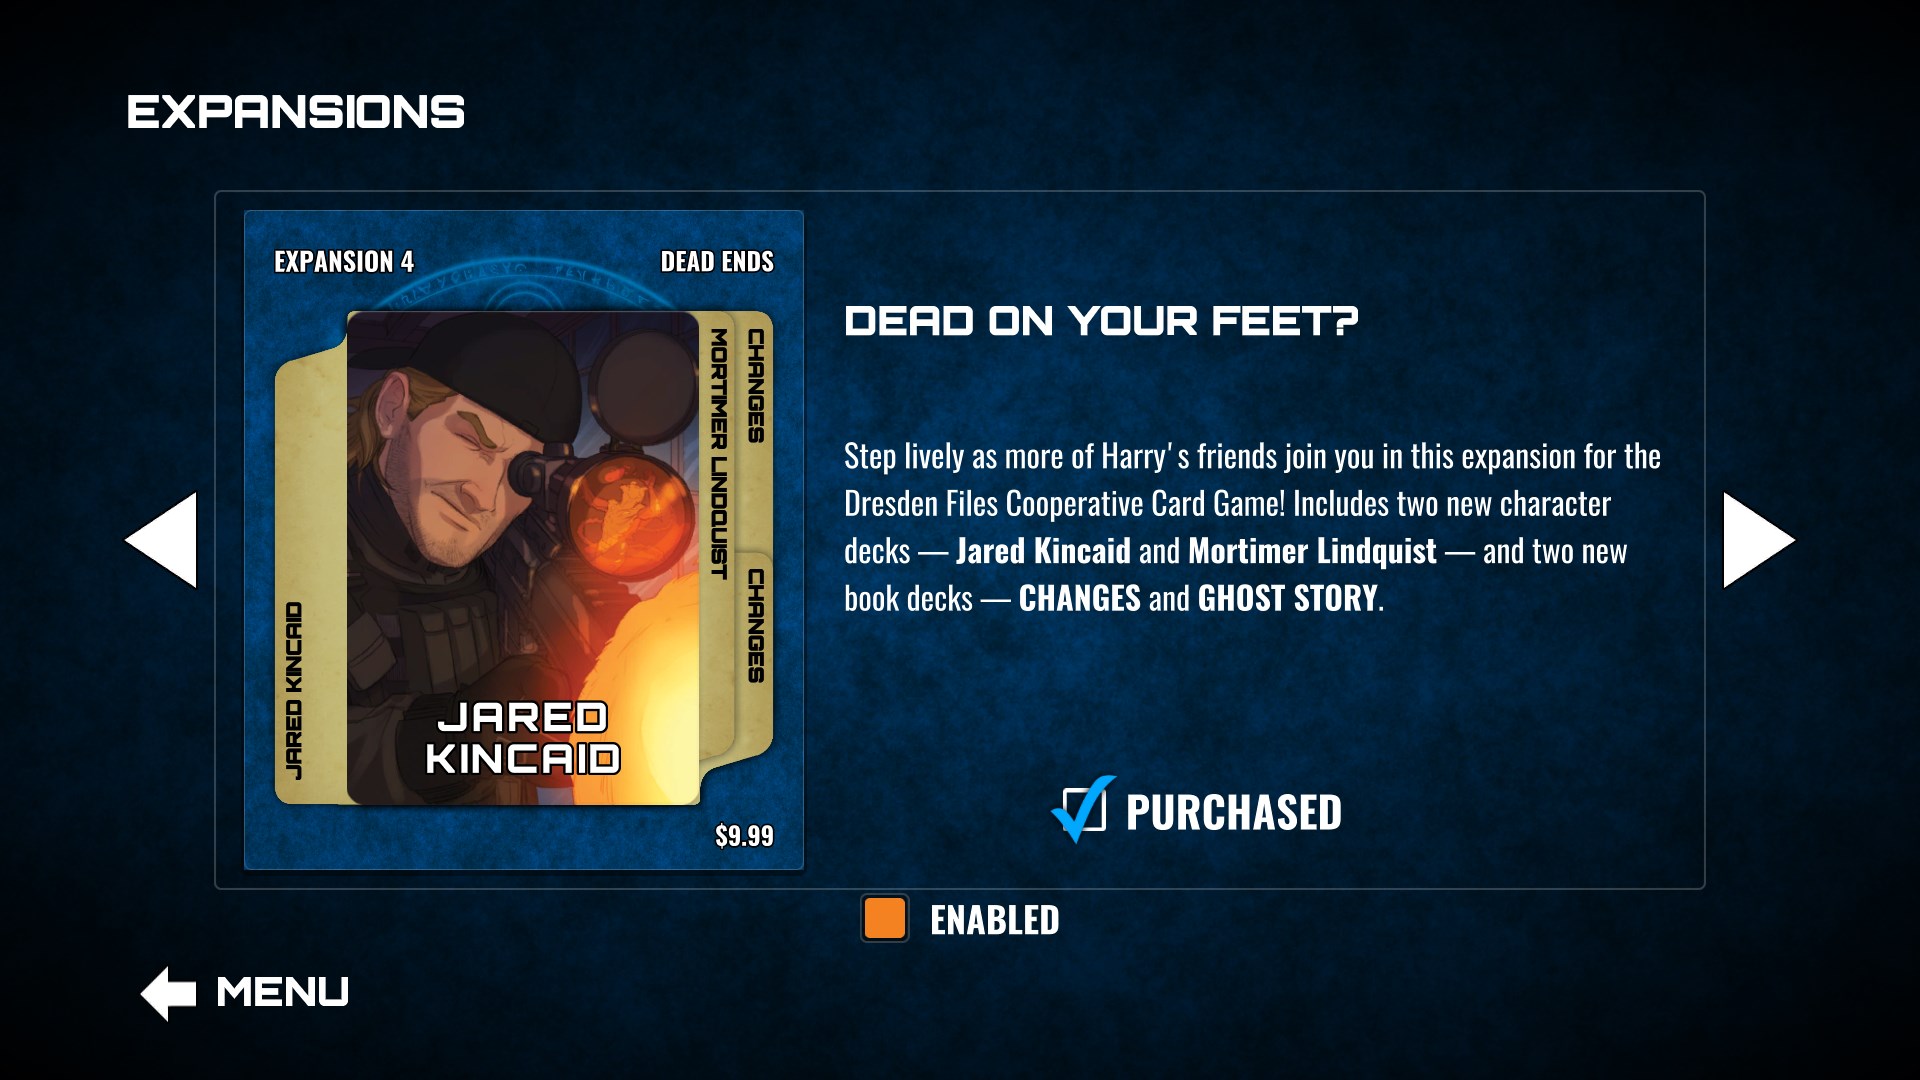 Dresden Files Cooperative Card Game - Dead Ends Featured Screenshot #1